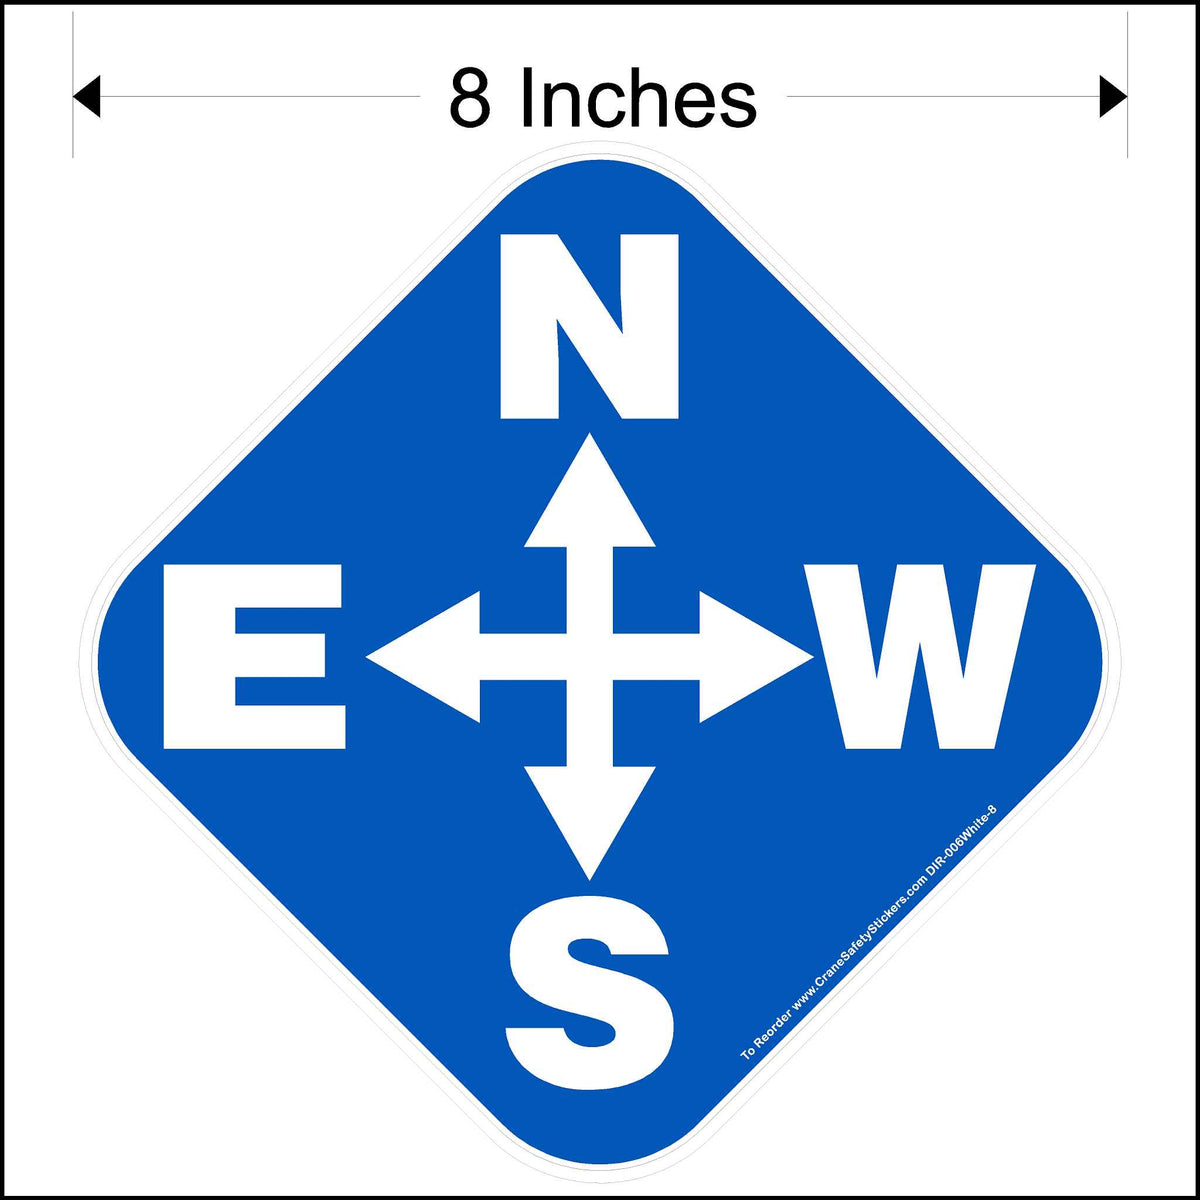 Overhead directional crane decal with white lettering and blue background. Decal size is 8 inches square.